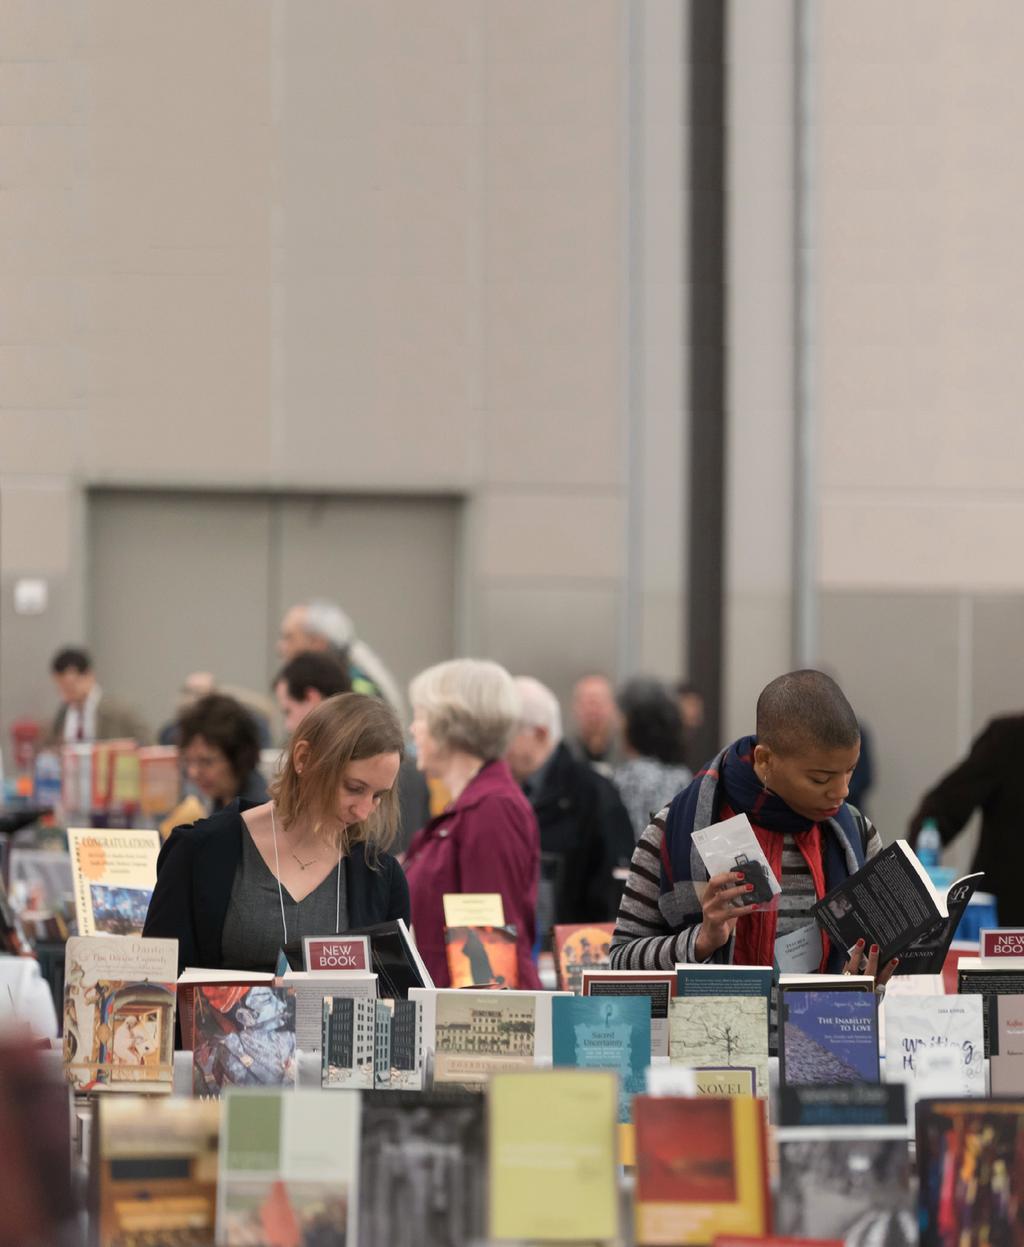 EXHIBITOR BENEFITS Access to sessions (two all-access badges per booth) Complimentary exhibitor badges (four per booth) The potential to meet with thousands of language and literature professionals